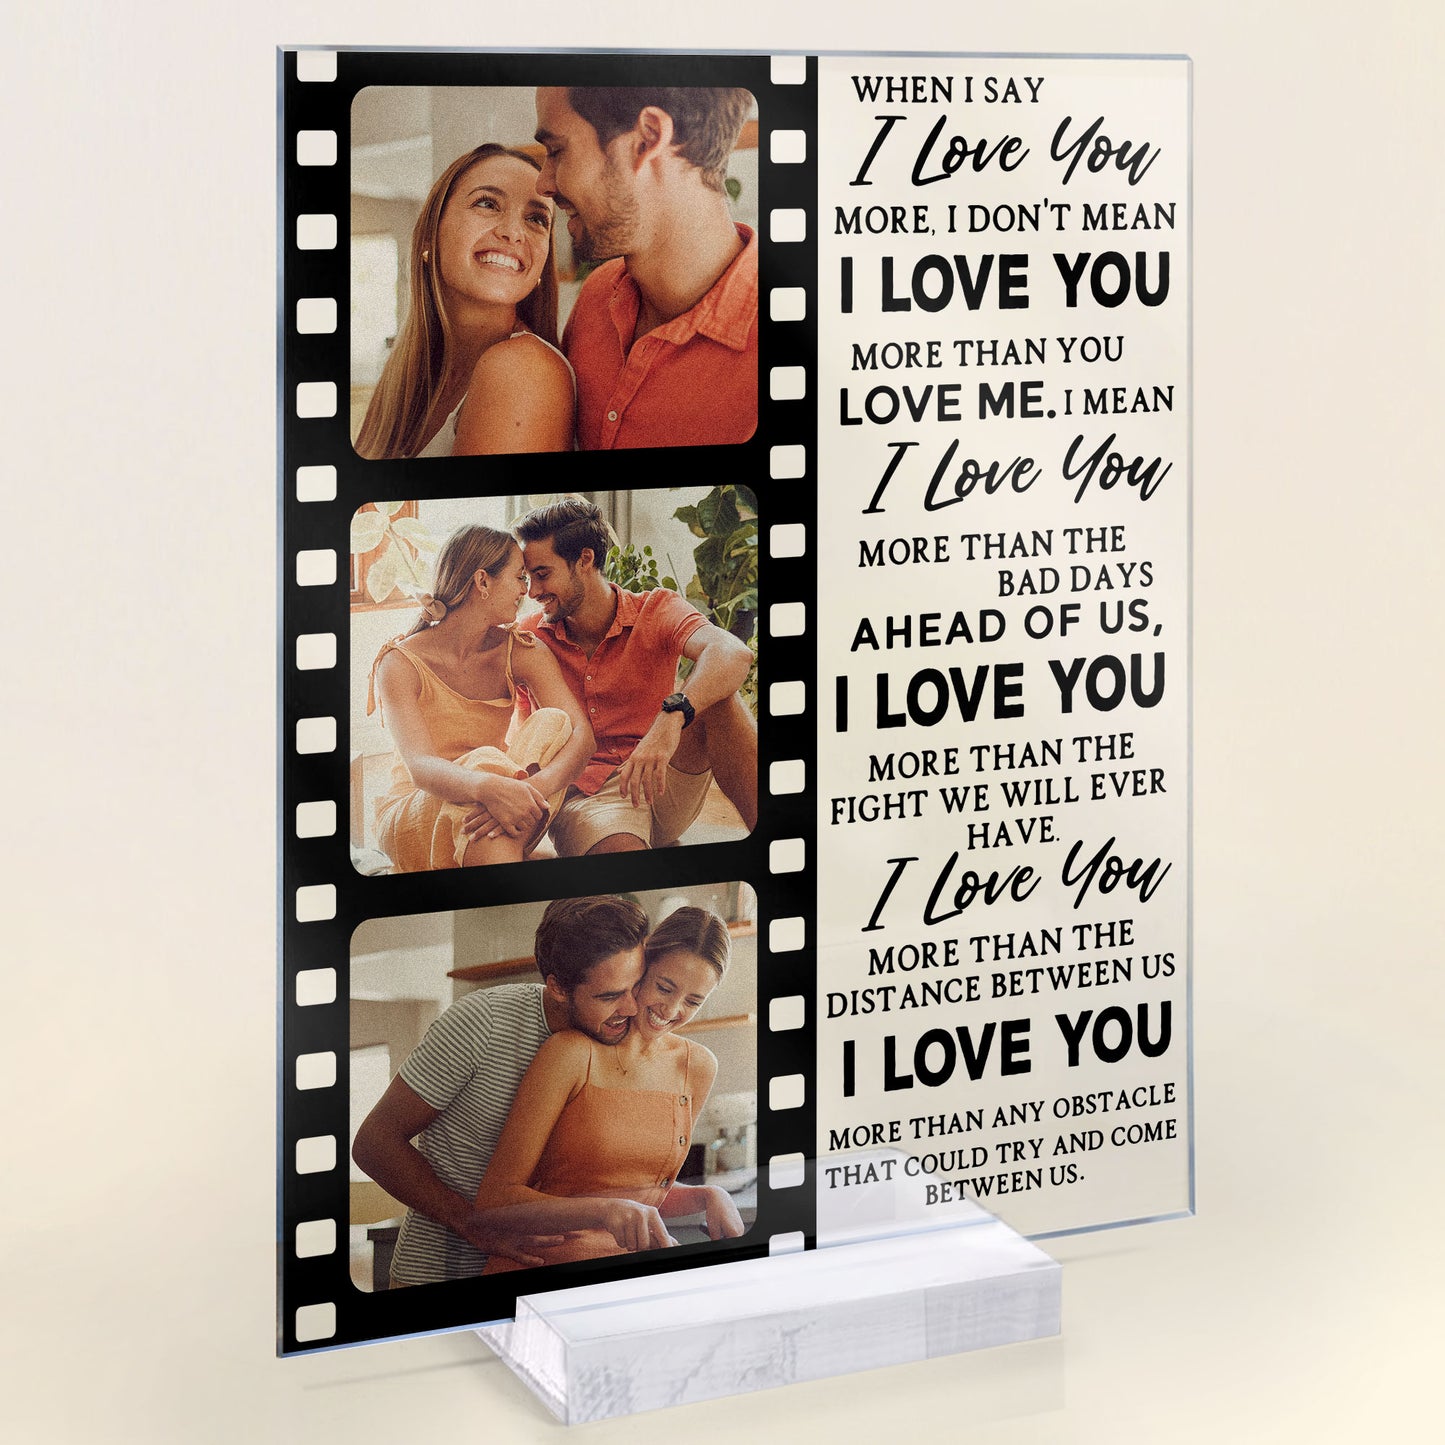 When I Say I Love You More - Personalized Acrylic Photo Plaque - Anniversary Gifts For Her, Him